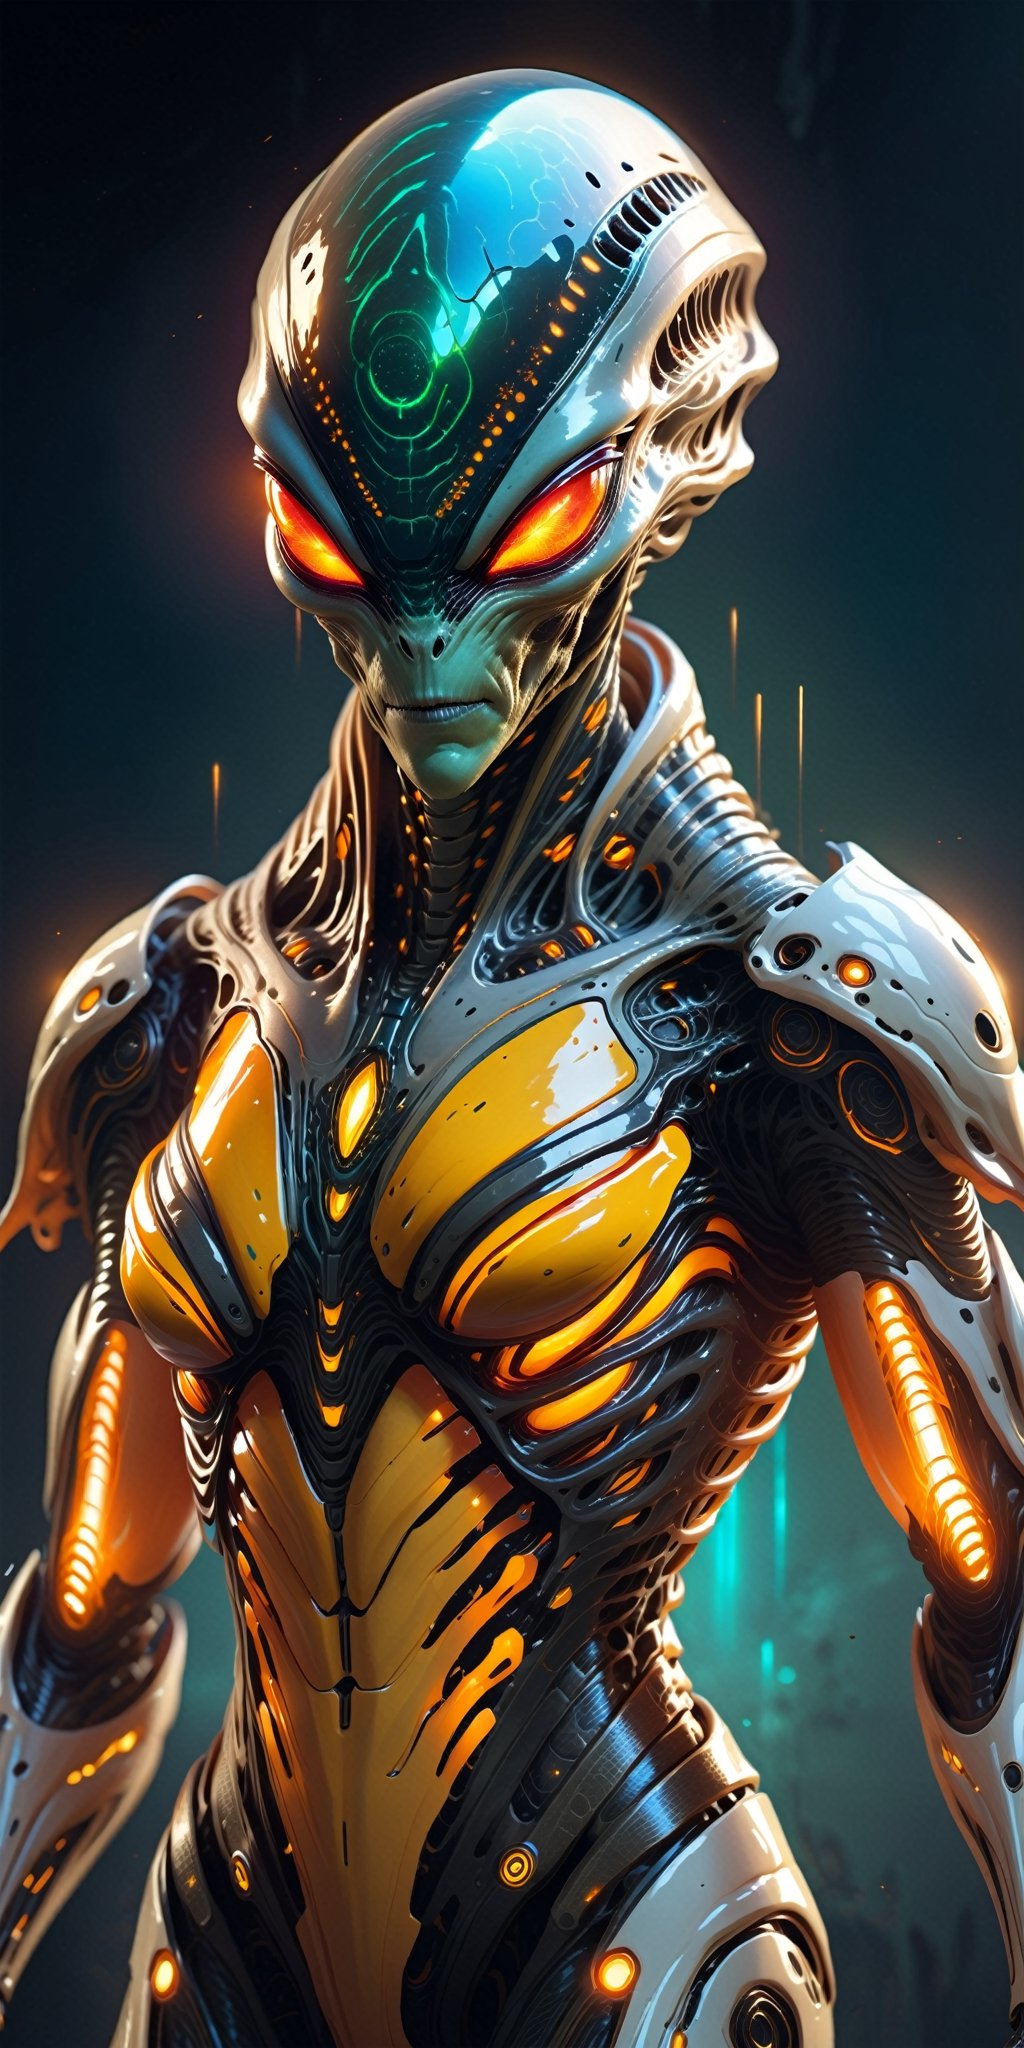 Create a spine-chilling image of an alien creature adorned in Hi-Tech biometric glowing armor, radiating a deadly and intimidating aura. Showcase the alien's otherworldly features and cutting-edge technology, resulting in a mesmerizing and frightening visual narrative. ((Full body)), 